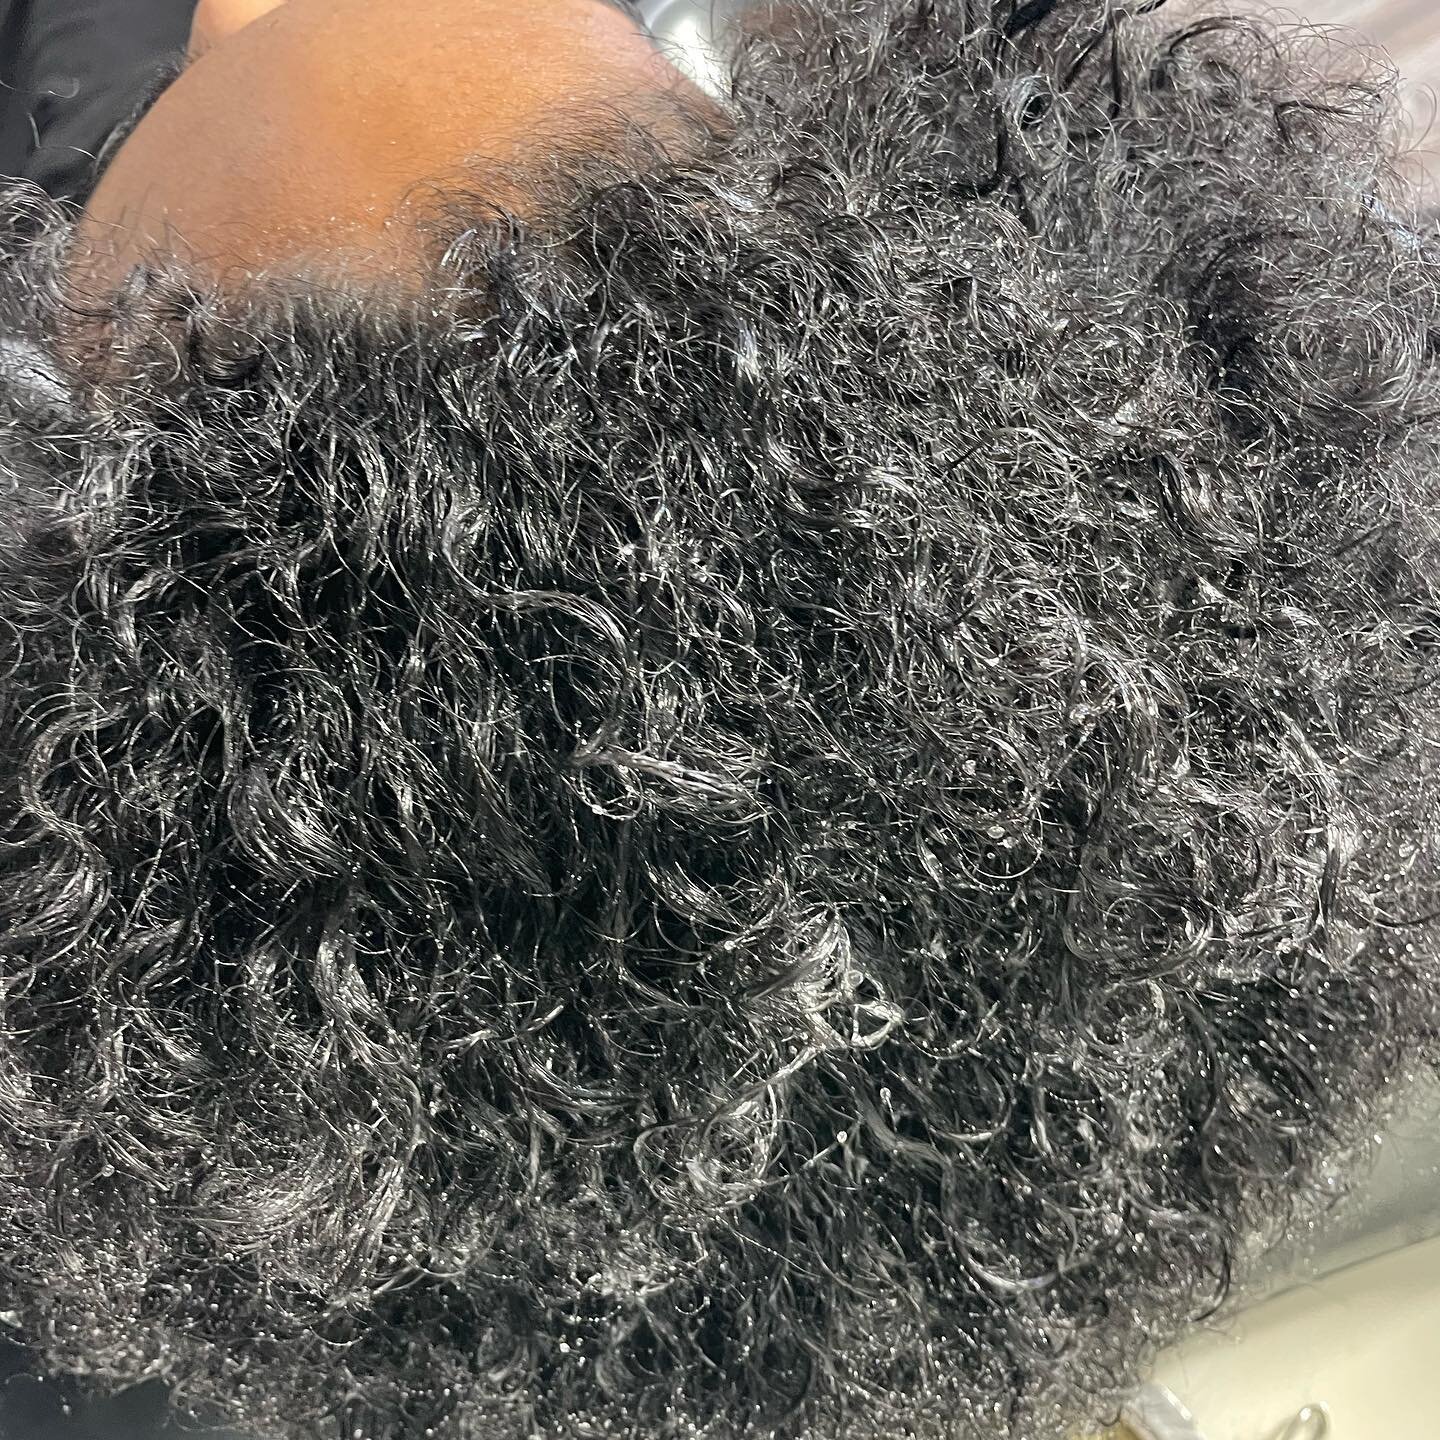 Zoom in! Tell me what you see.

The water is just sitting on top of the hair. This client uses natural handmade products that contain different oils and butters. After showing her the effects of using those products she is now rethinking her product 